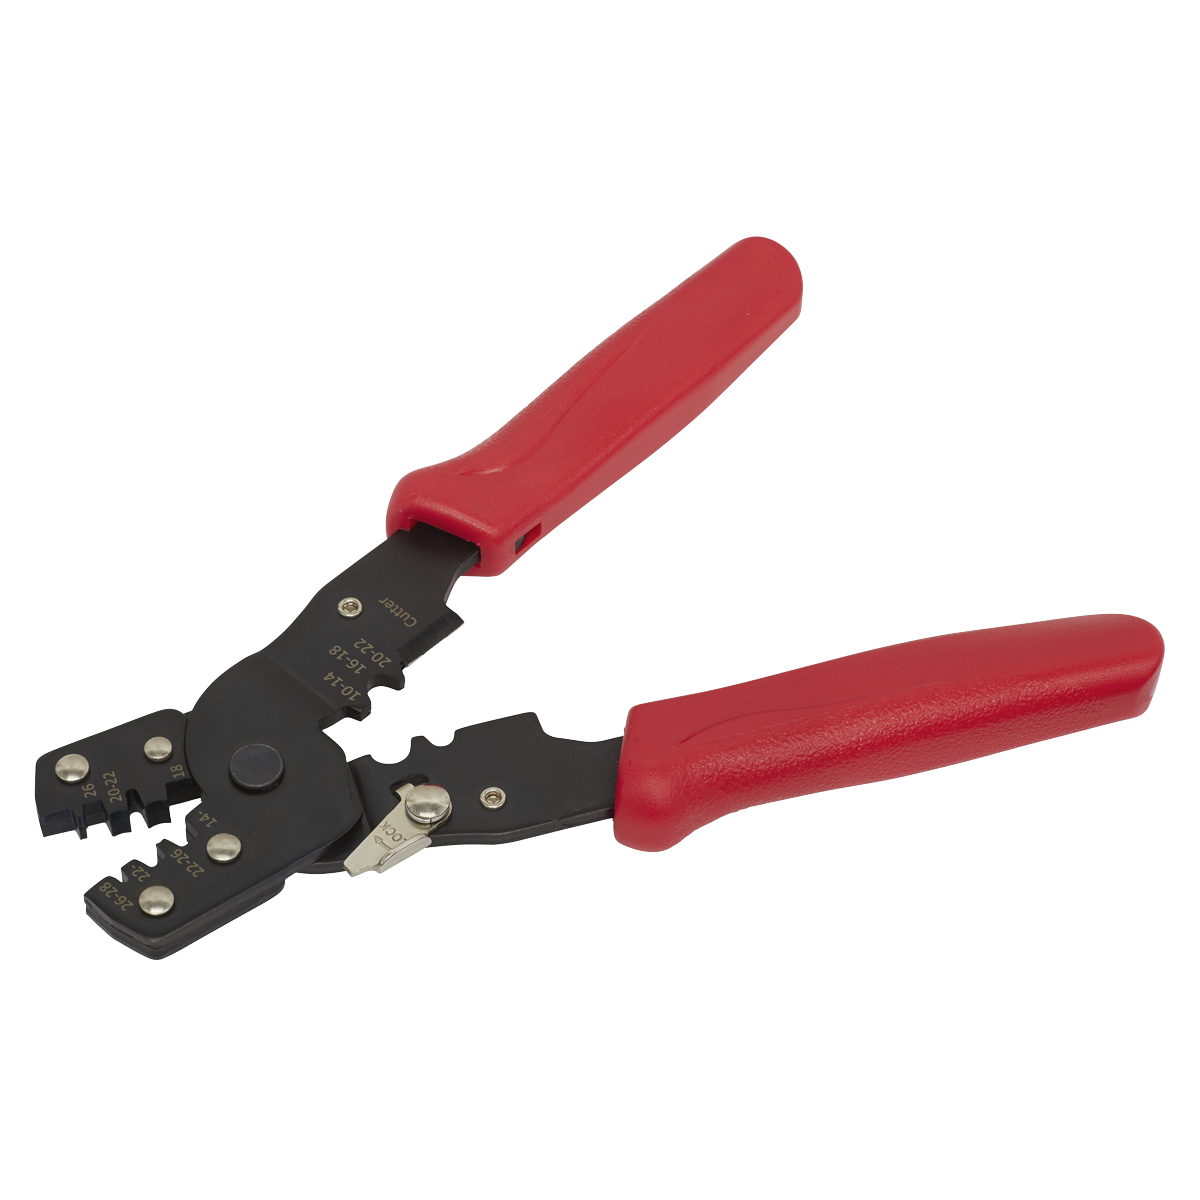 Non-Ratcheting Crimping Tool Insulated/Non-Insulated Terminals - AK3850 - Farming Parts